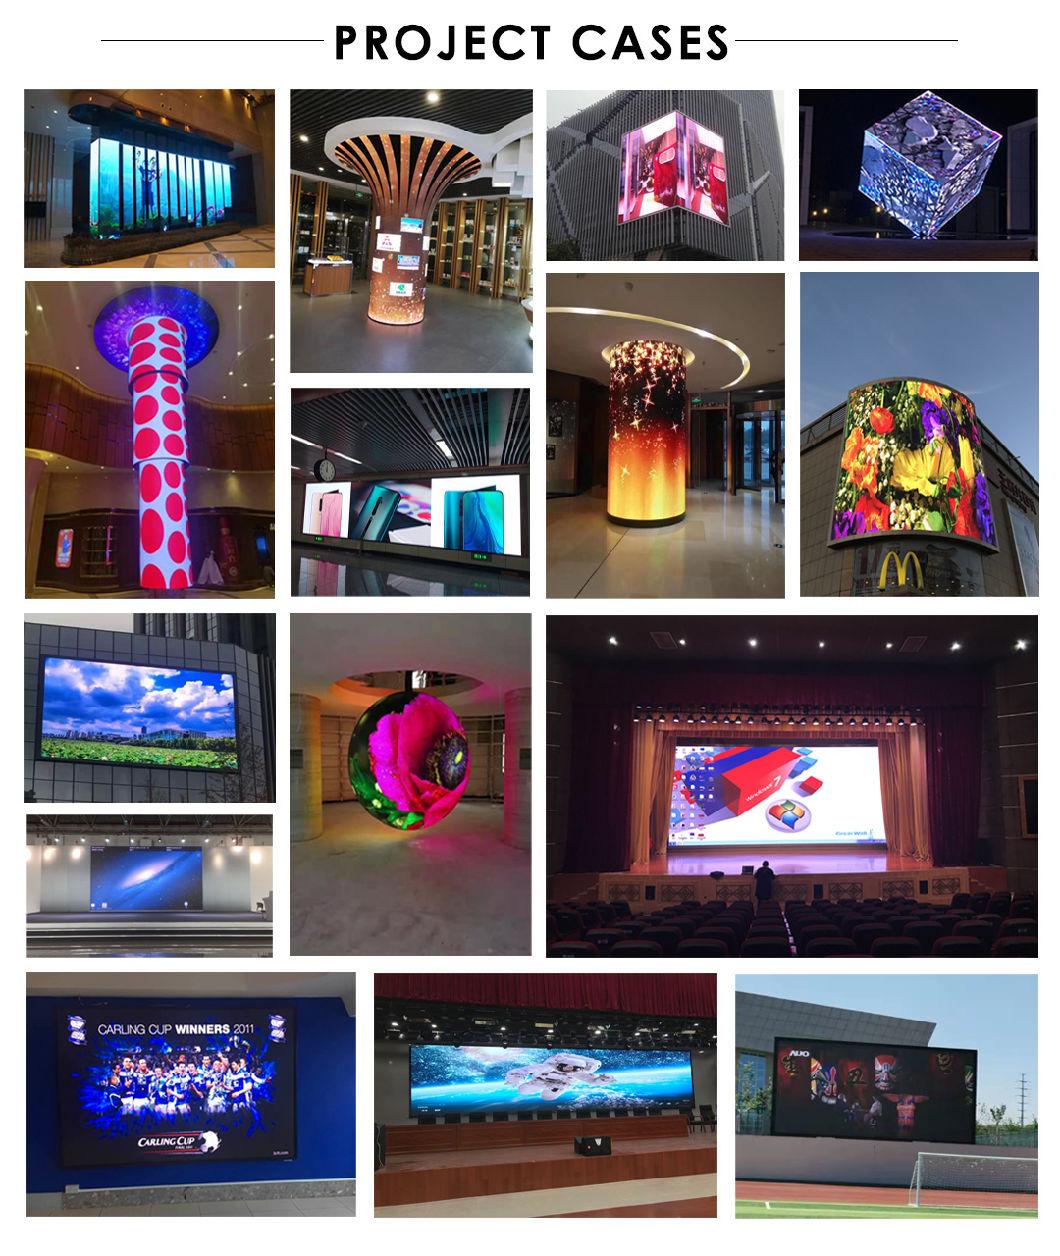 Indoor Definition LED Display P6 Full Color LED Screen